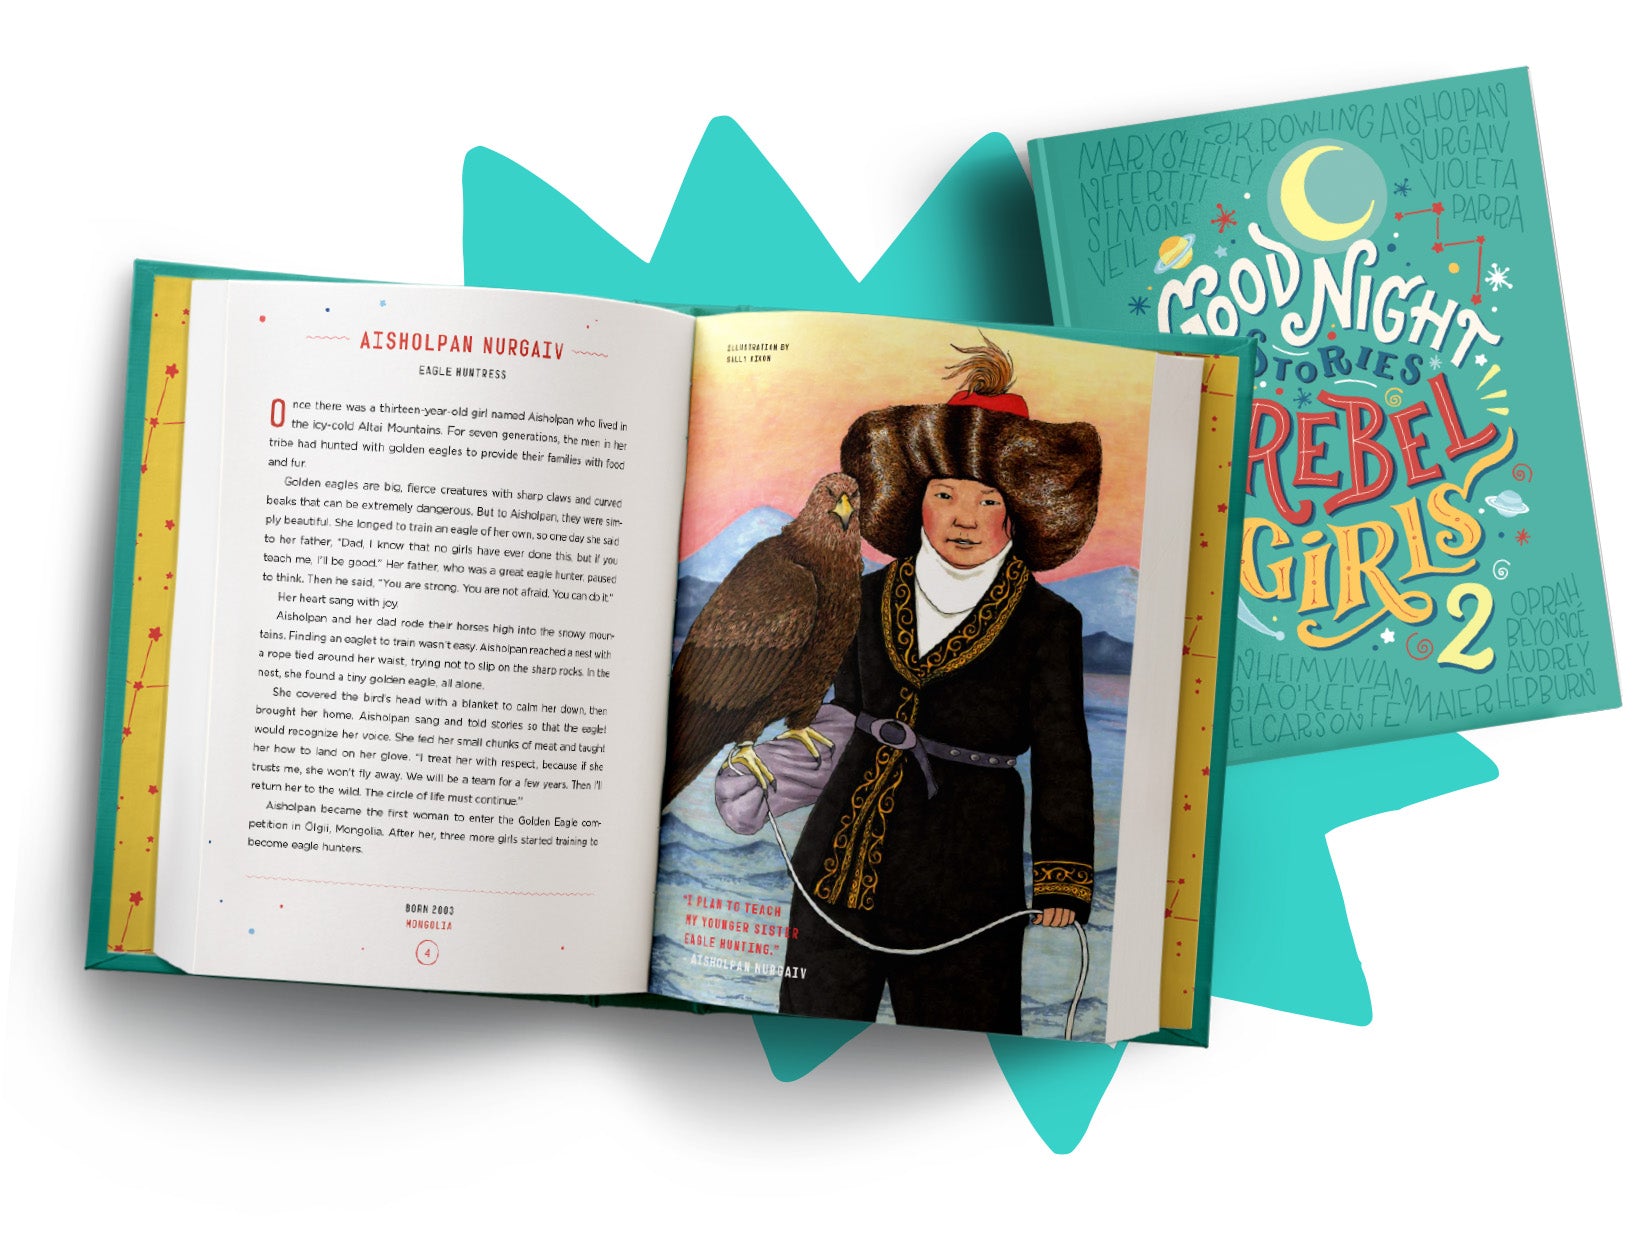 <p>This sequel to the sensational New York Times bestseller, <em>Good Night Stories for Rebel Girls</em>, showcases 100 brand-new bedtime stories of incredible women throughout history and around the world.</p>
<p>In this book, readers will embark on an empowering journey through 100 new bedtime stories, featuring the adventures of extraordinary women through the ages, from Nefertiti to Beyoncé. The unique narrative style of Good Night Stories for Rebel Girls transforms each biography into a fairytale, filling readers with wonder and a burning curiosity to know more about each hero.</p>
<p><em>Good Night Stories for Rebel Girls, Volume 2</em> boasts a brand-new graphic design, a glossary, and 100 full-page, full-color portraits to depict each subject, created by the best female artists of our time.</p>
<p>After the release of Volume 1, our passionate community of supporters, spanning across 70+ countries, wrote in to suggest the Rebel Girls who inspired them. As a result, the stories in Volume 2 are entirely crowd-sourced. Now, we can share them with one another.</p>
